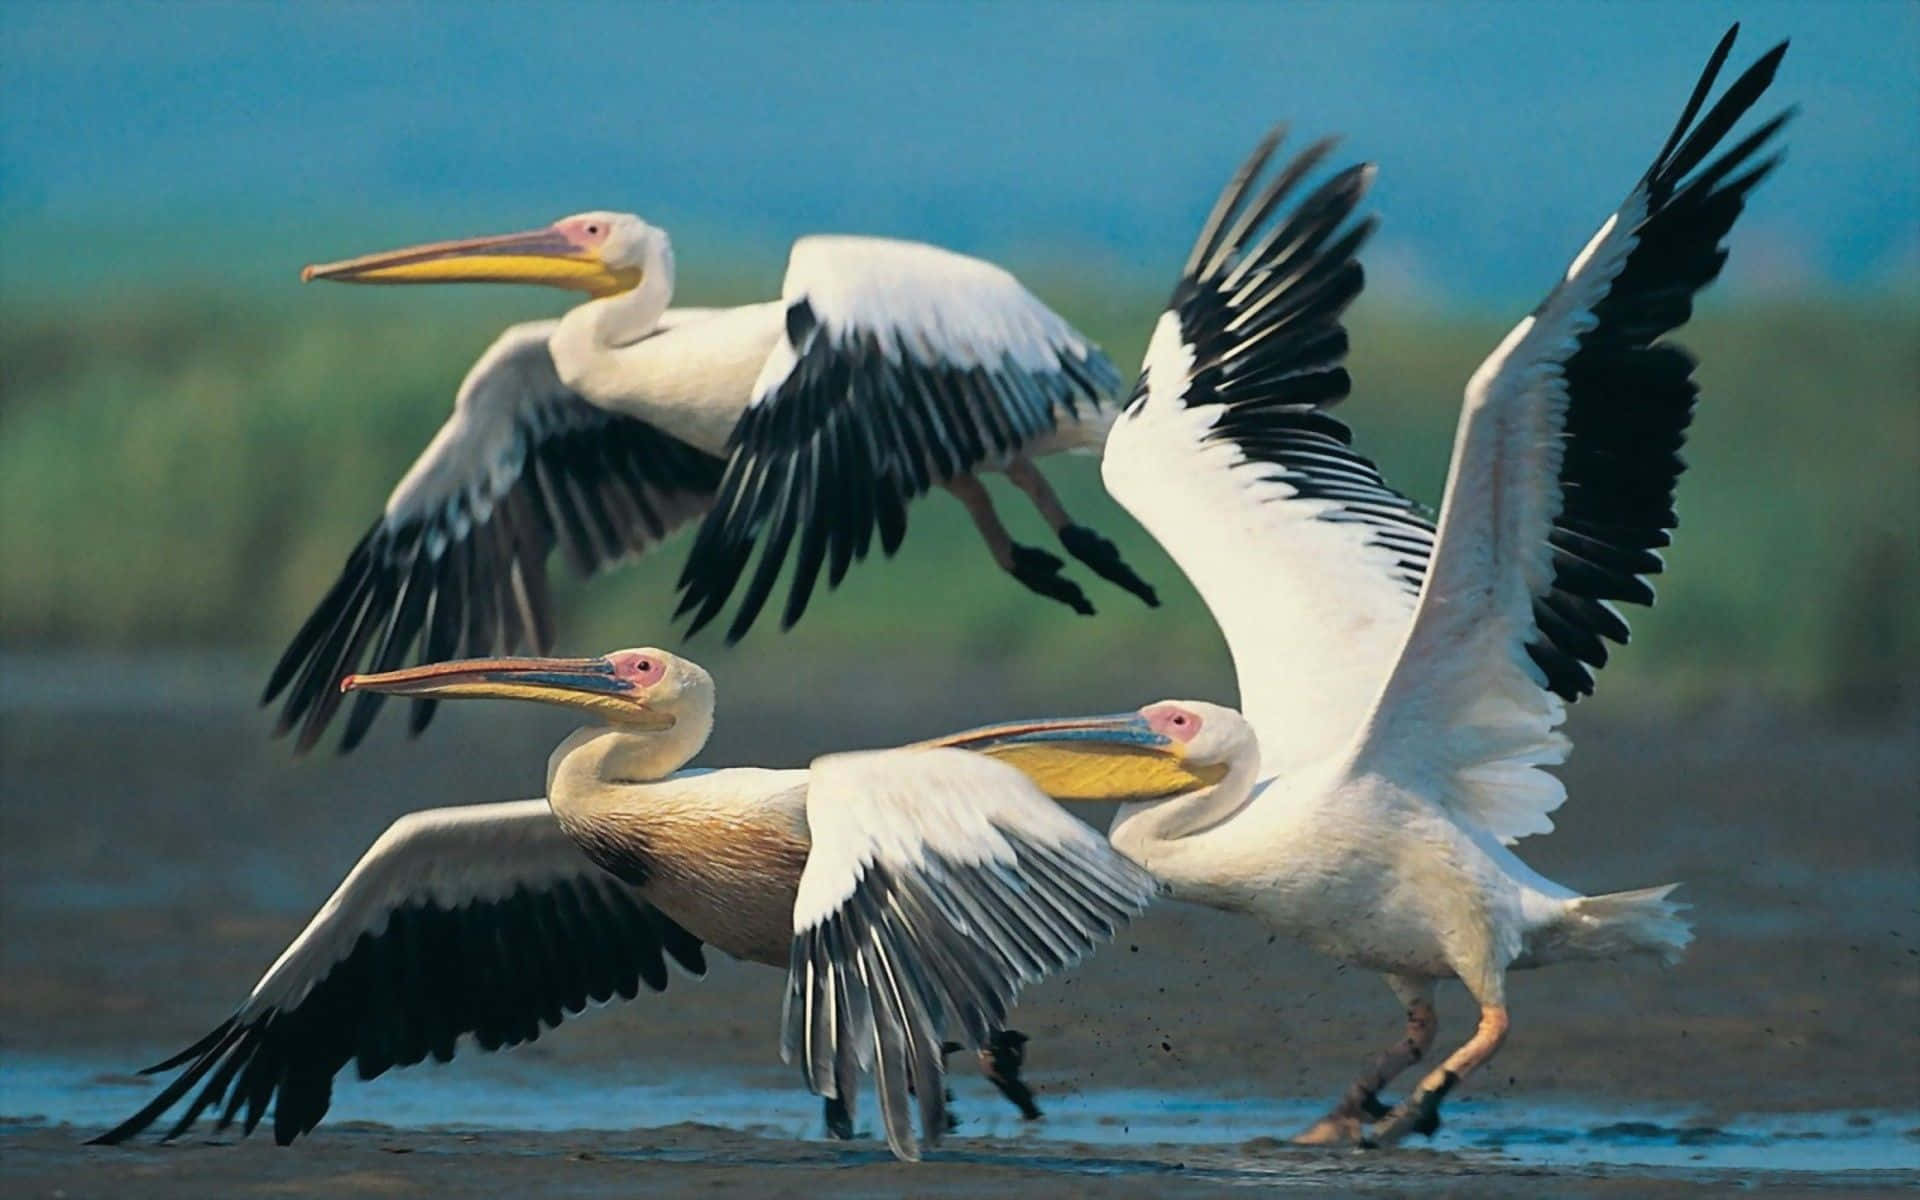 A Family of Pelicans Looks Calmly at the Rising Sun